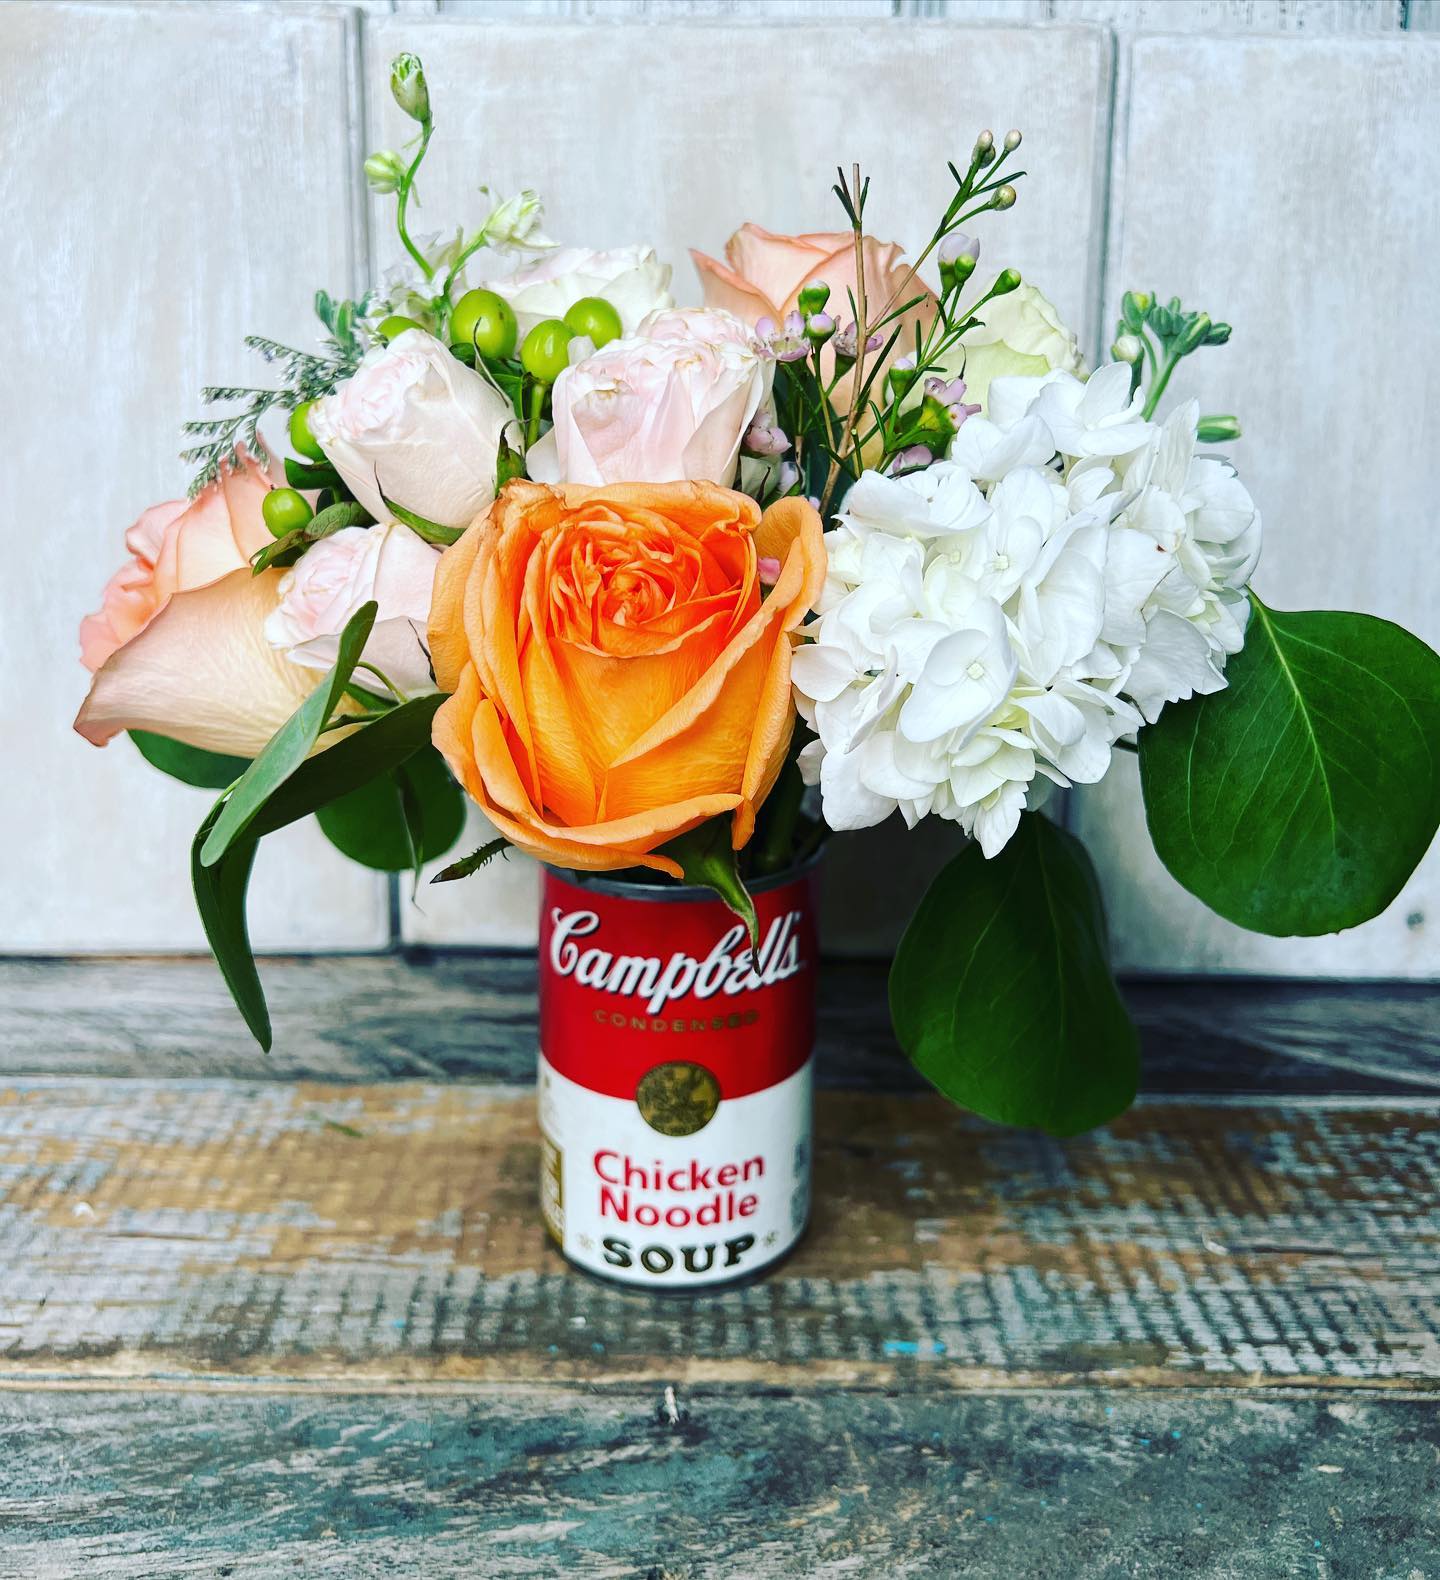 Get Well with a Cup of Soup  - Send a comforting touch with our perfect get well gift – a can of chicken soup filled with beautiful fresh seasonal flowers. This thoughtful gesture is sure to convey your wishes for a speedy recovery and bring a warm smile to that special someone's face. A unique and heartwarming way to show you care during their healing journey.